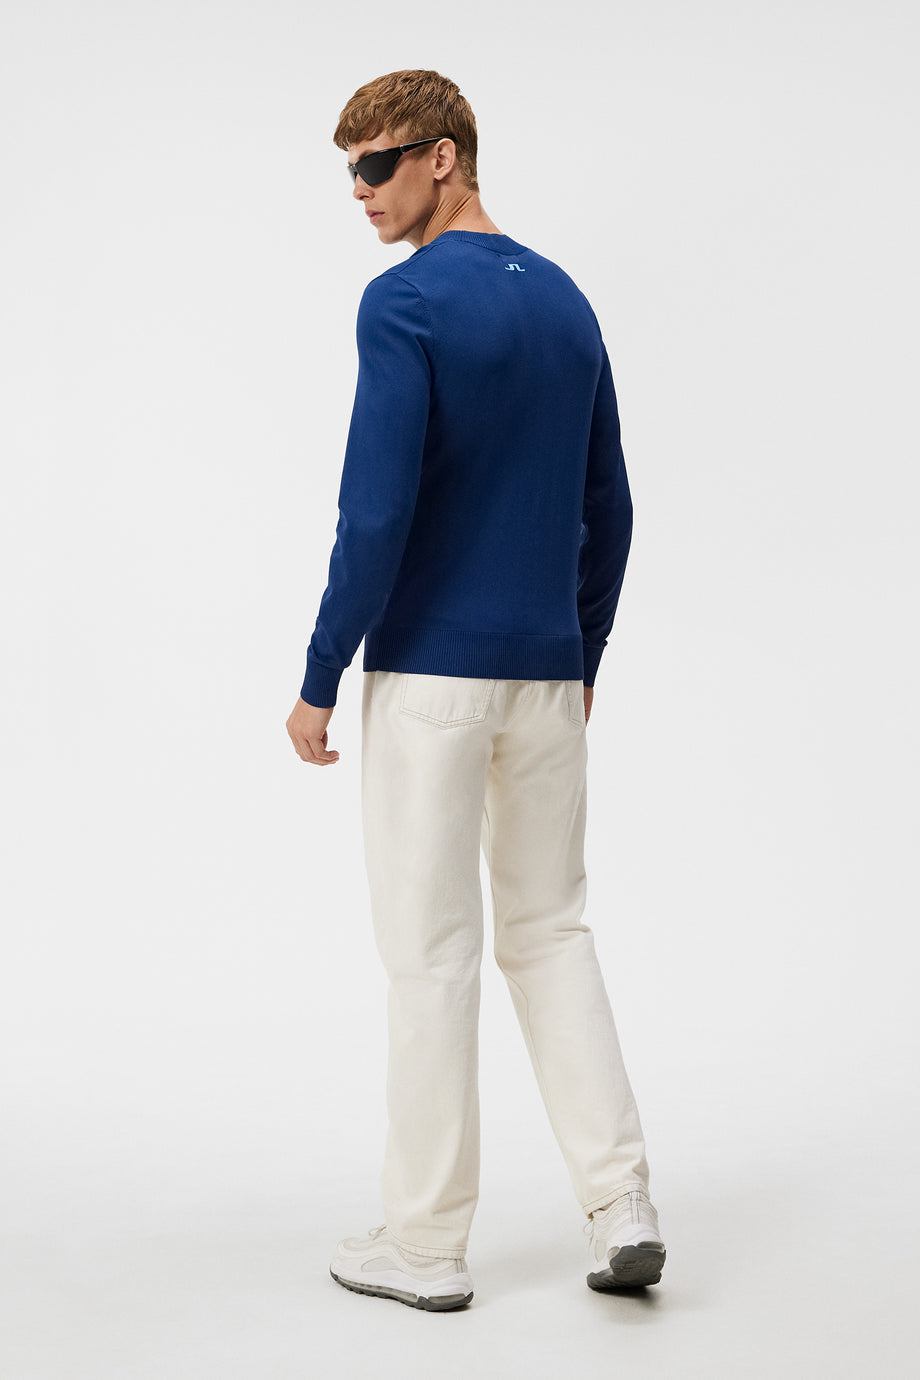 Gus Knitted Sweater / Estate Blue – J.Lindeberg